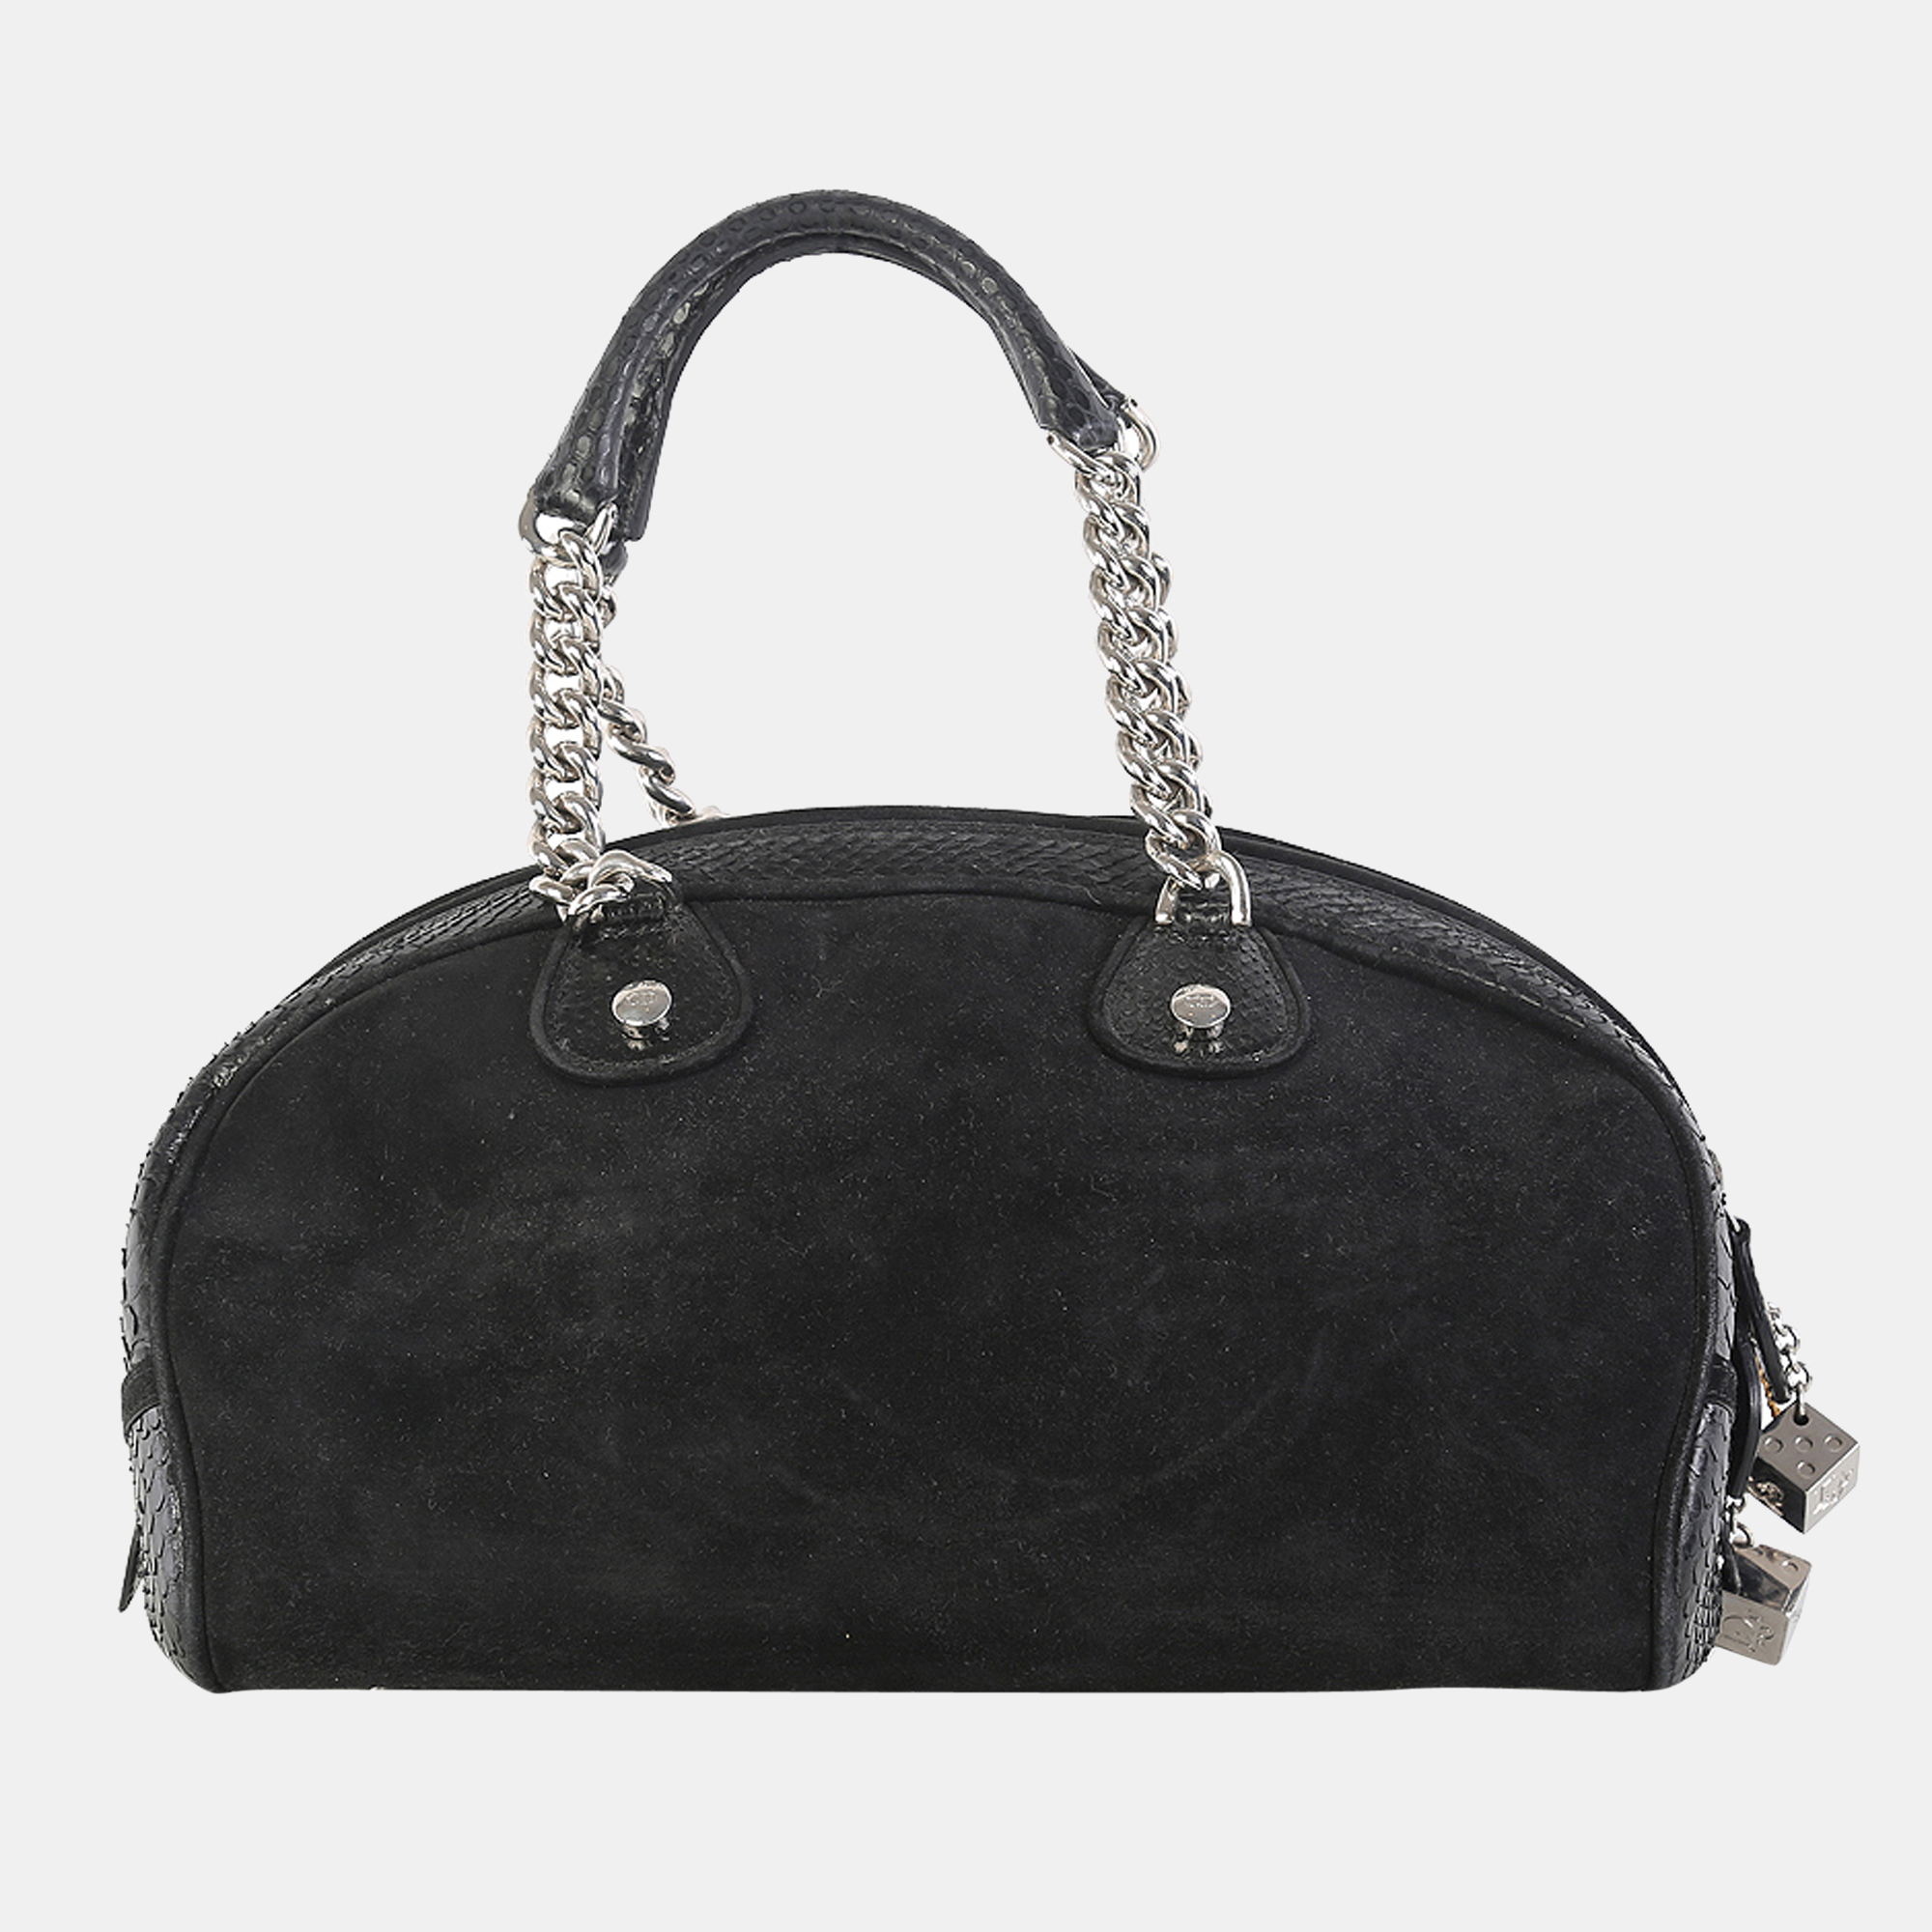 Christian Dior Black Suede And Leather Gambler Bag